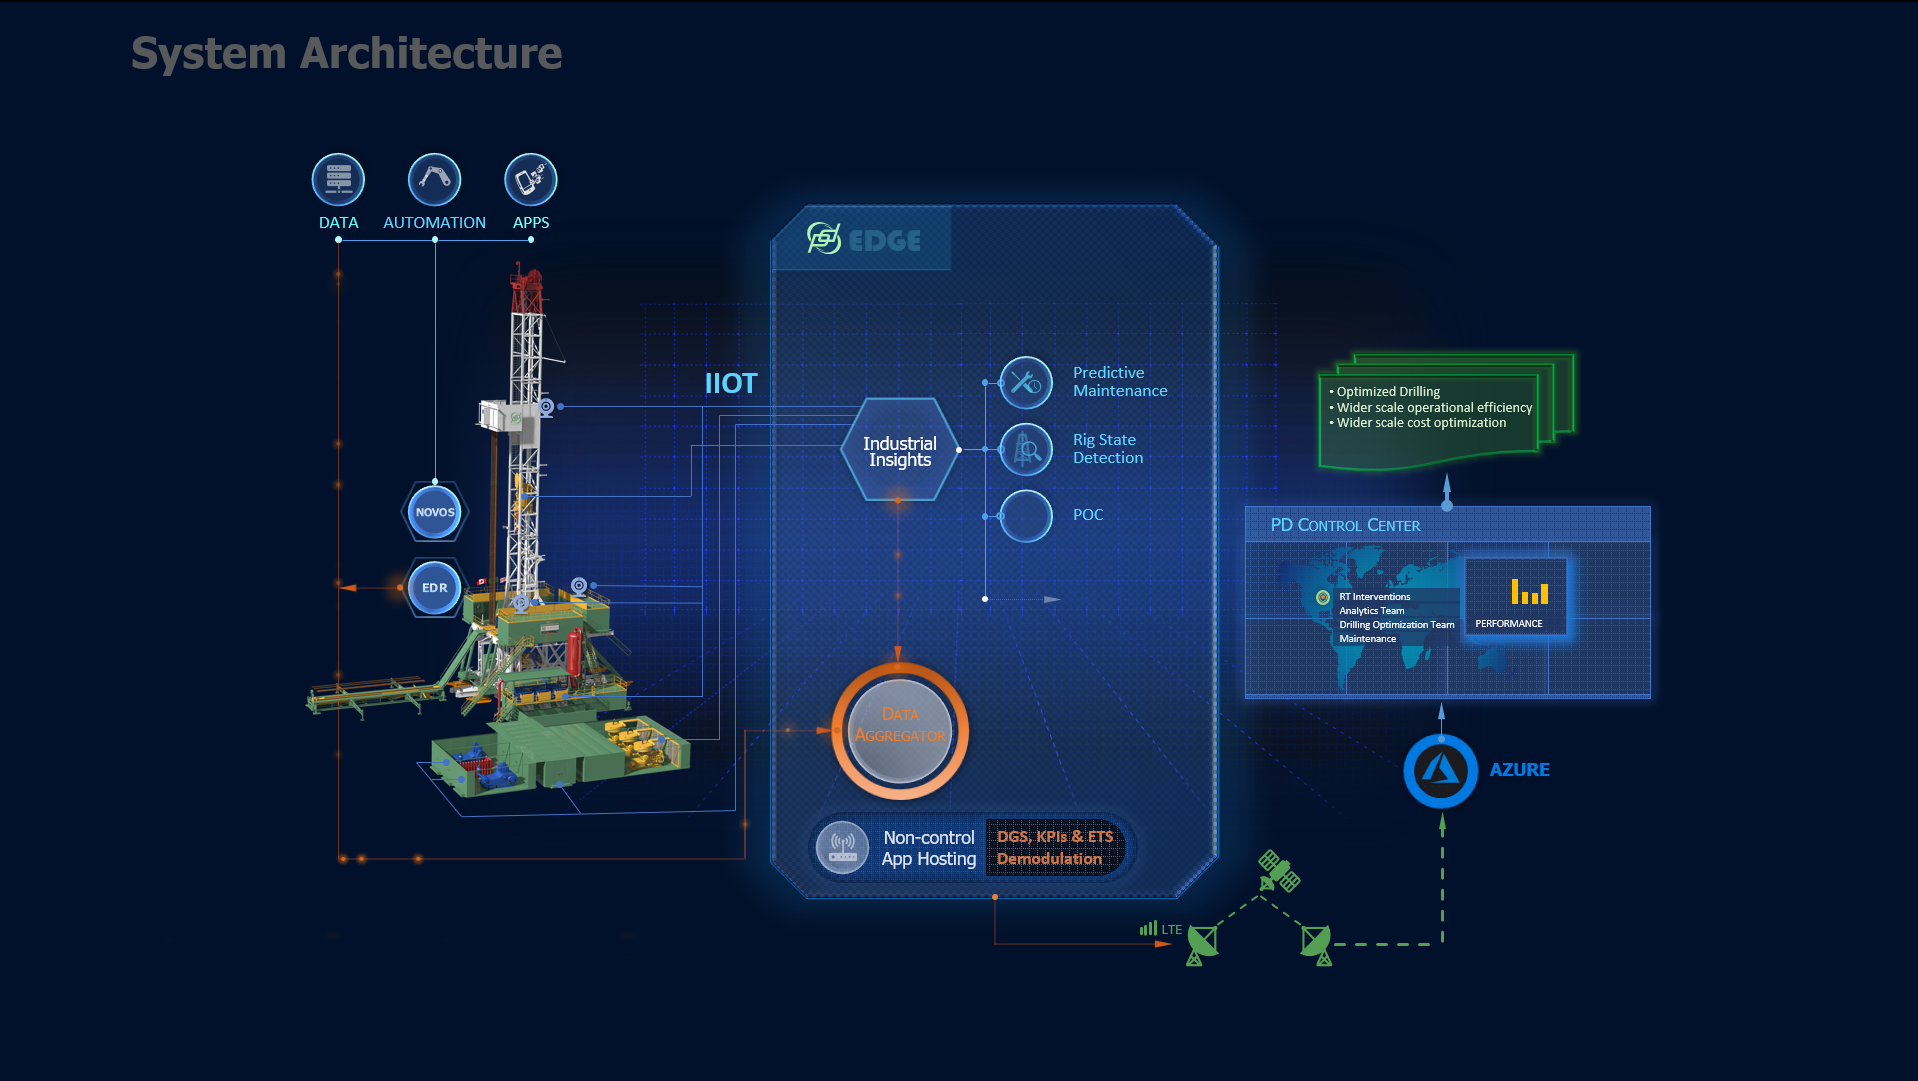 Provided exciting context in System Architecture PowerPoint animation